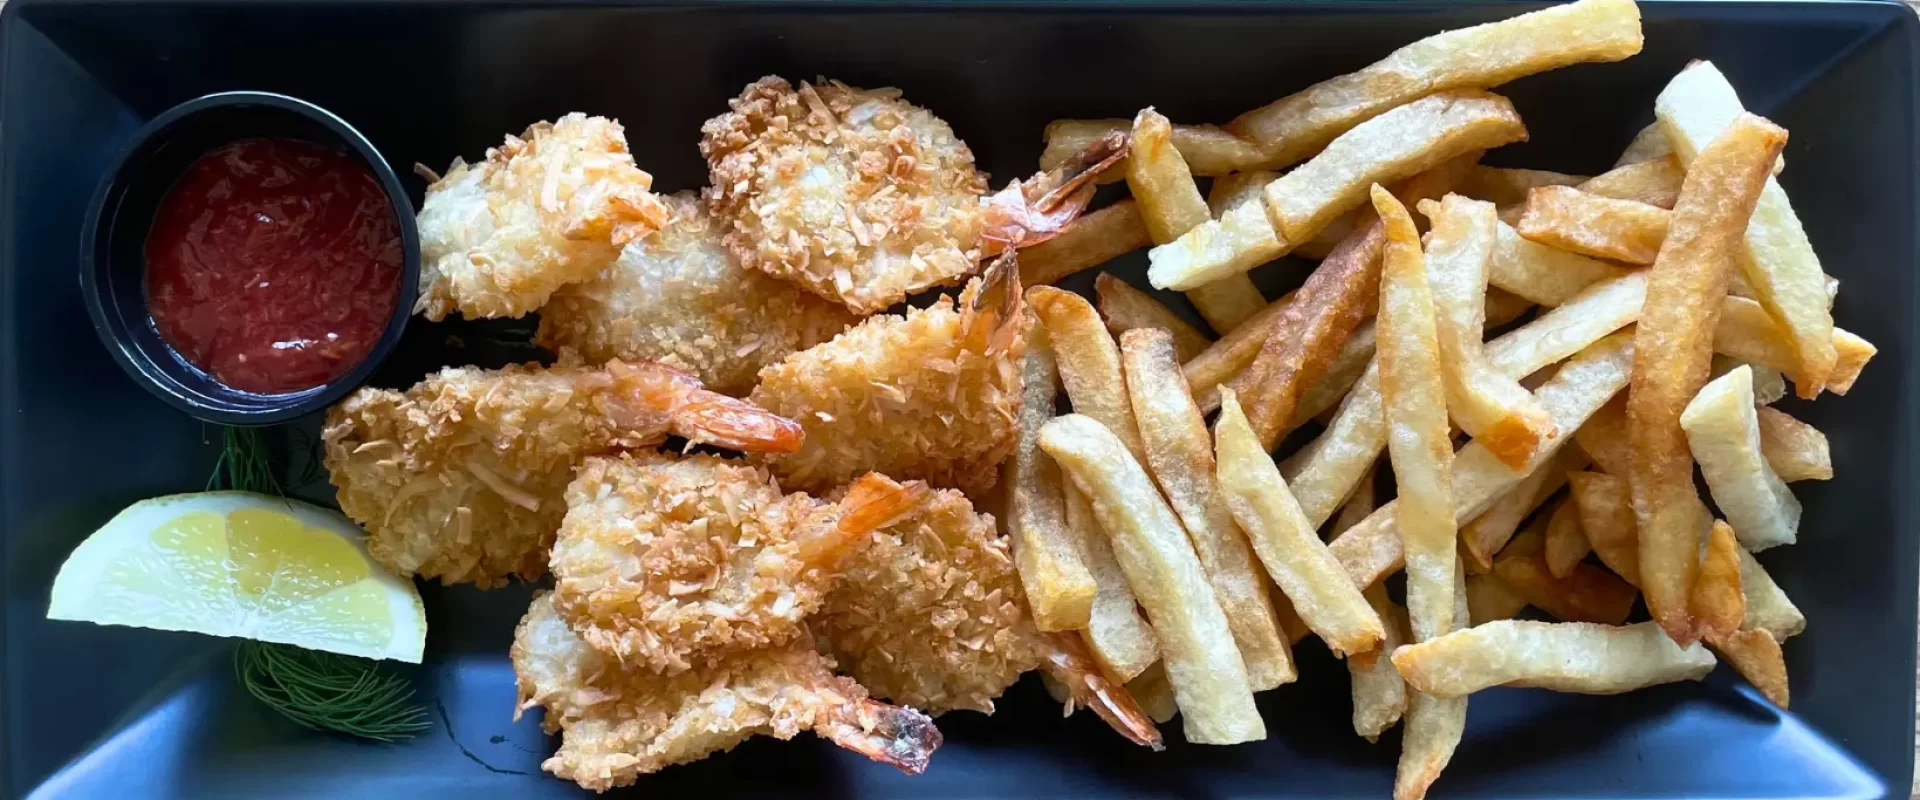 Sea Shanty - SEAFOODS - Coconut Shrimp and Chips